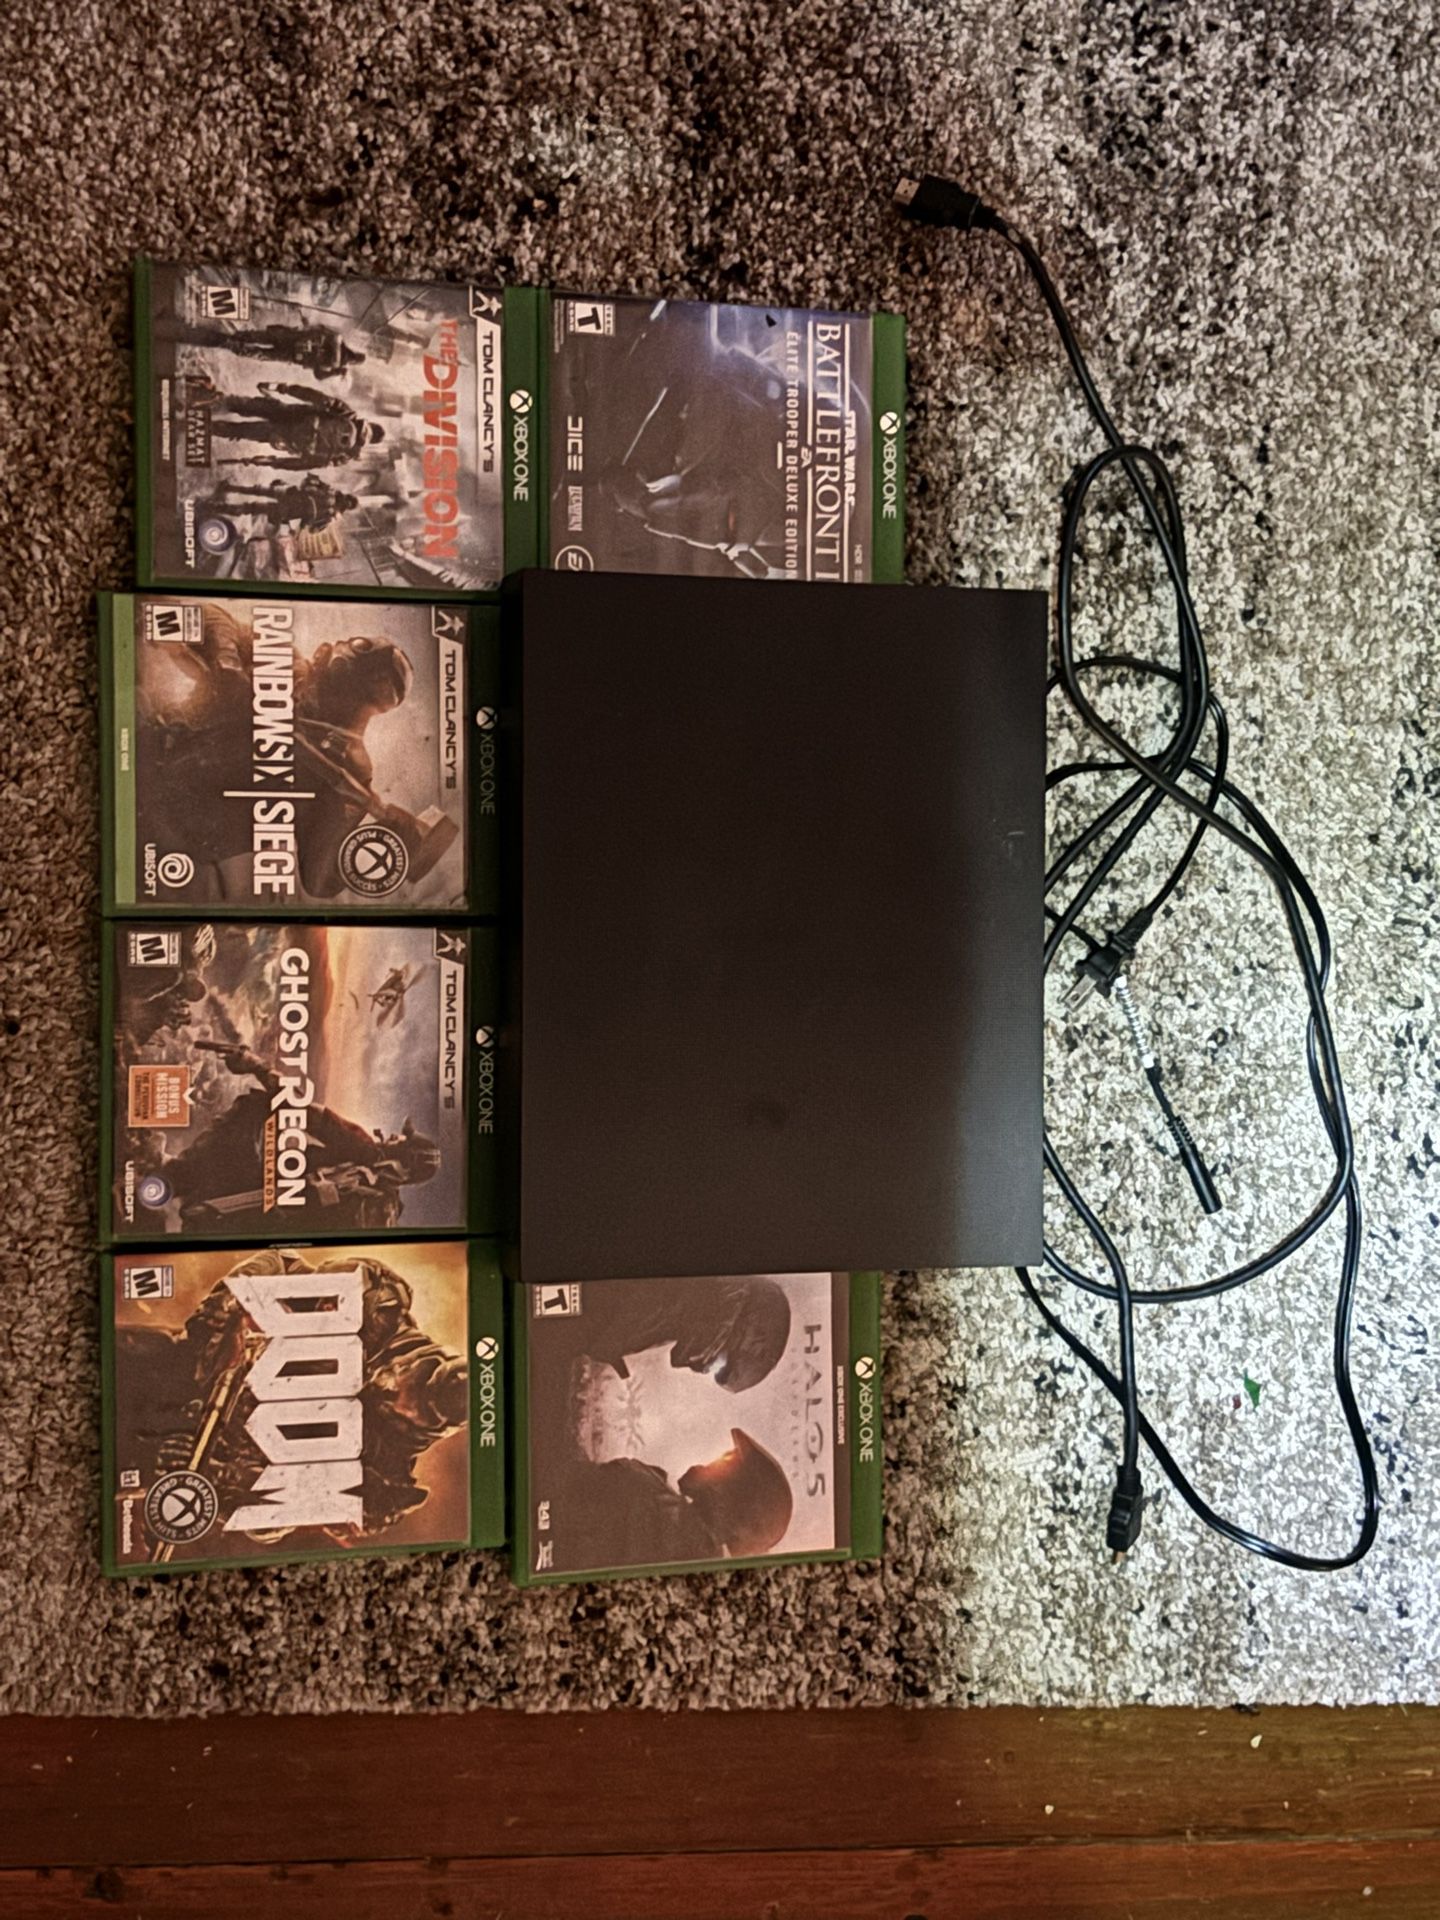 Xbox For Sale